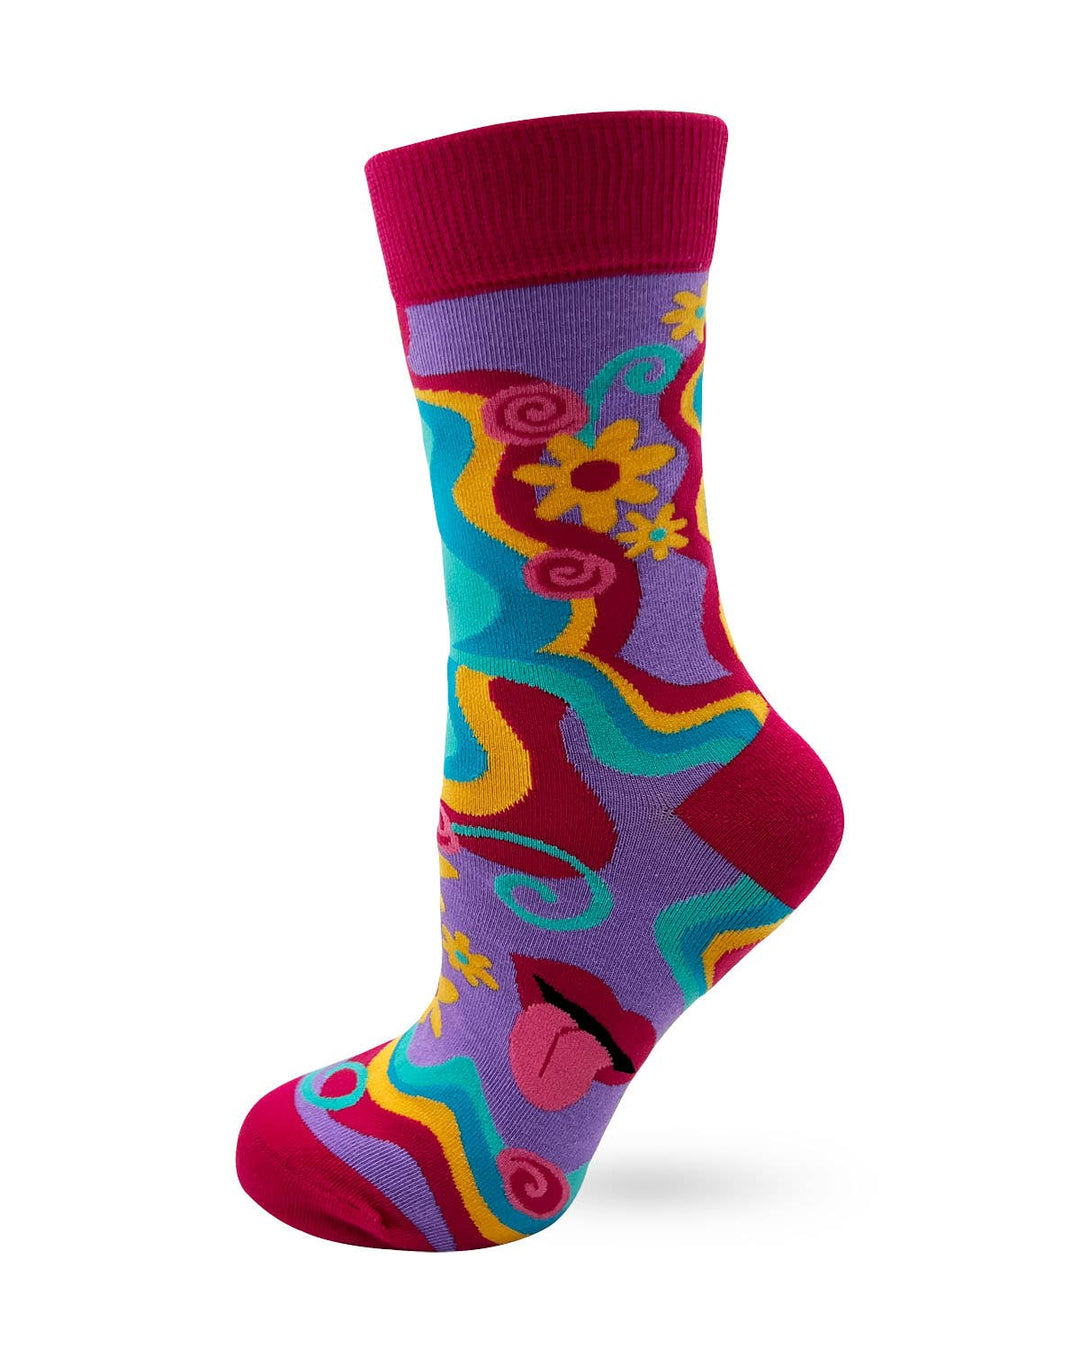 Fabdaz - If You Lick it They Will Come Funny Women's Crew Socks